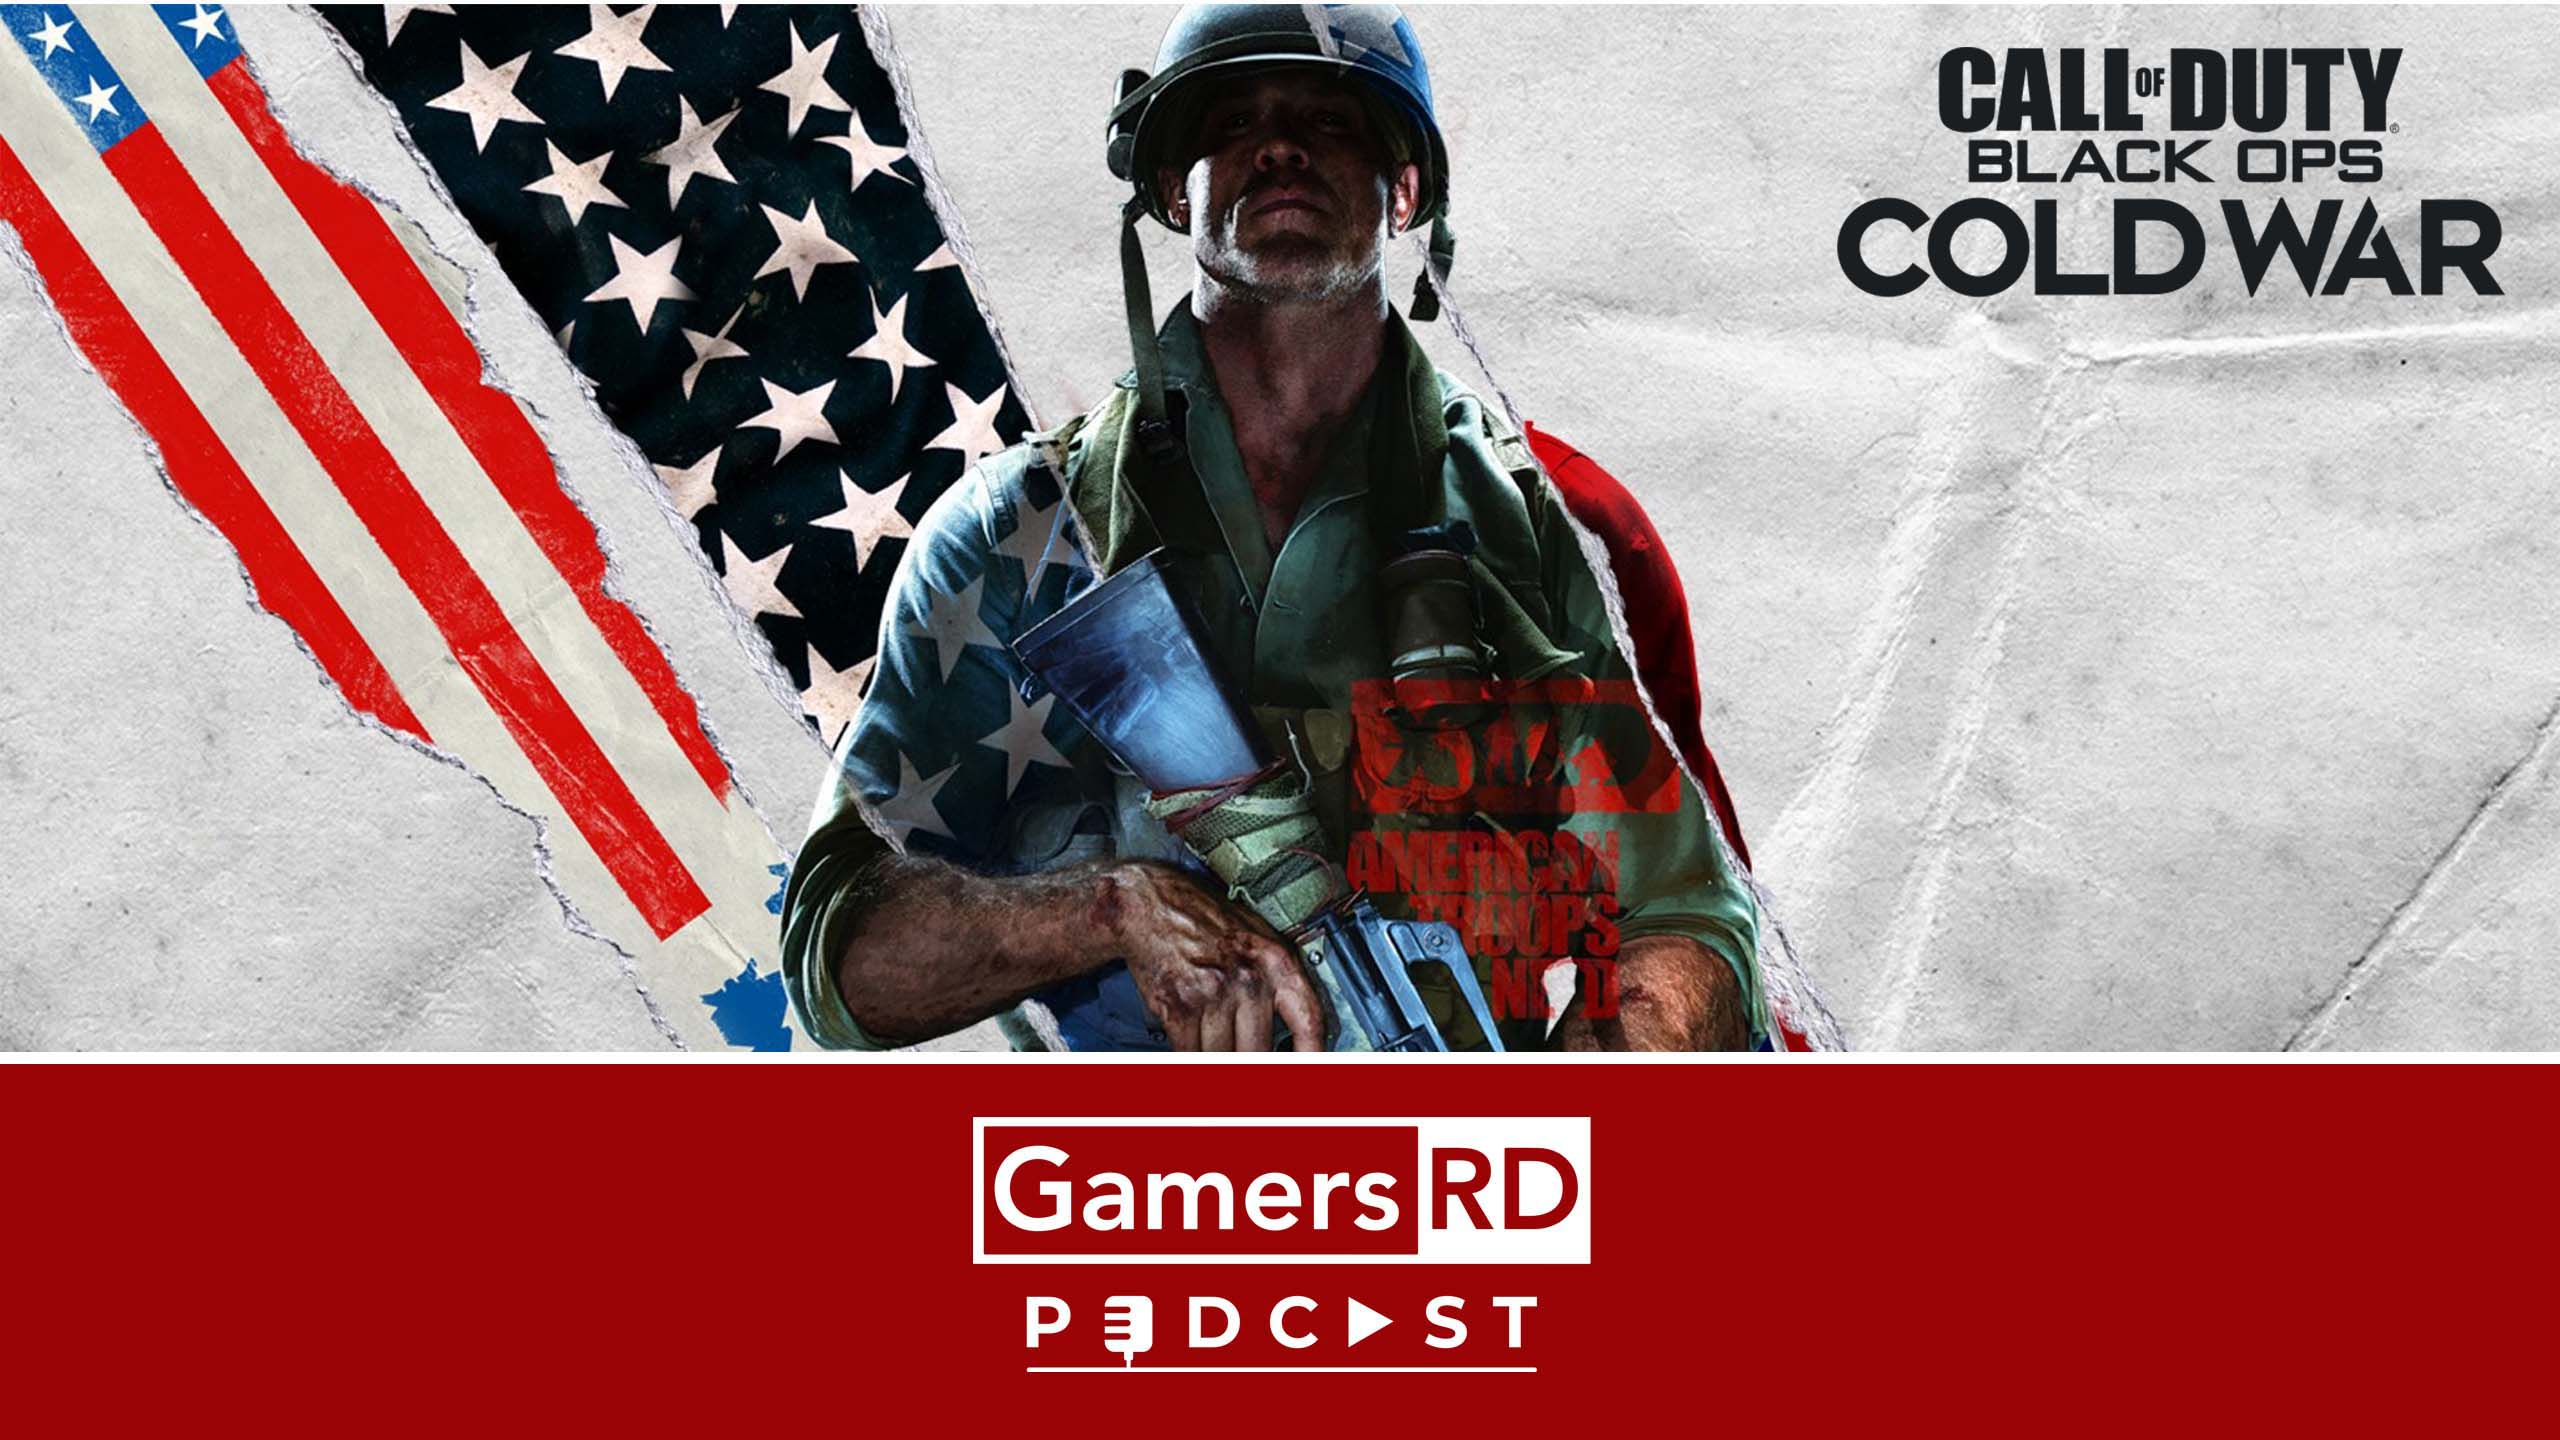 GamersRD Podcast Impresiones Beta Call of Duty Black Ops Cold War Page